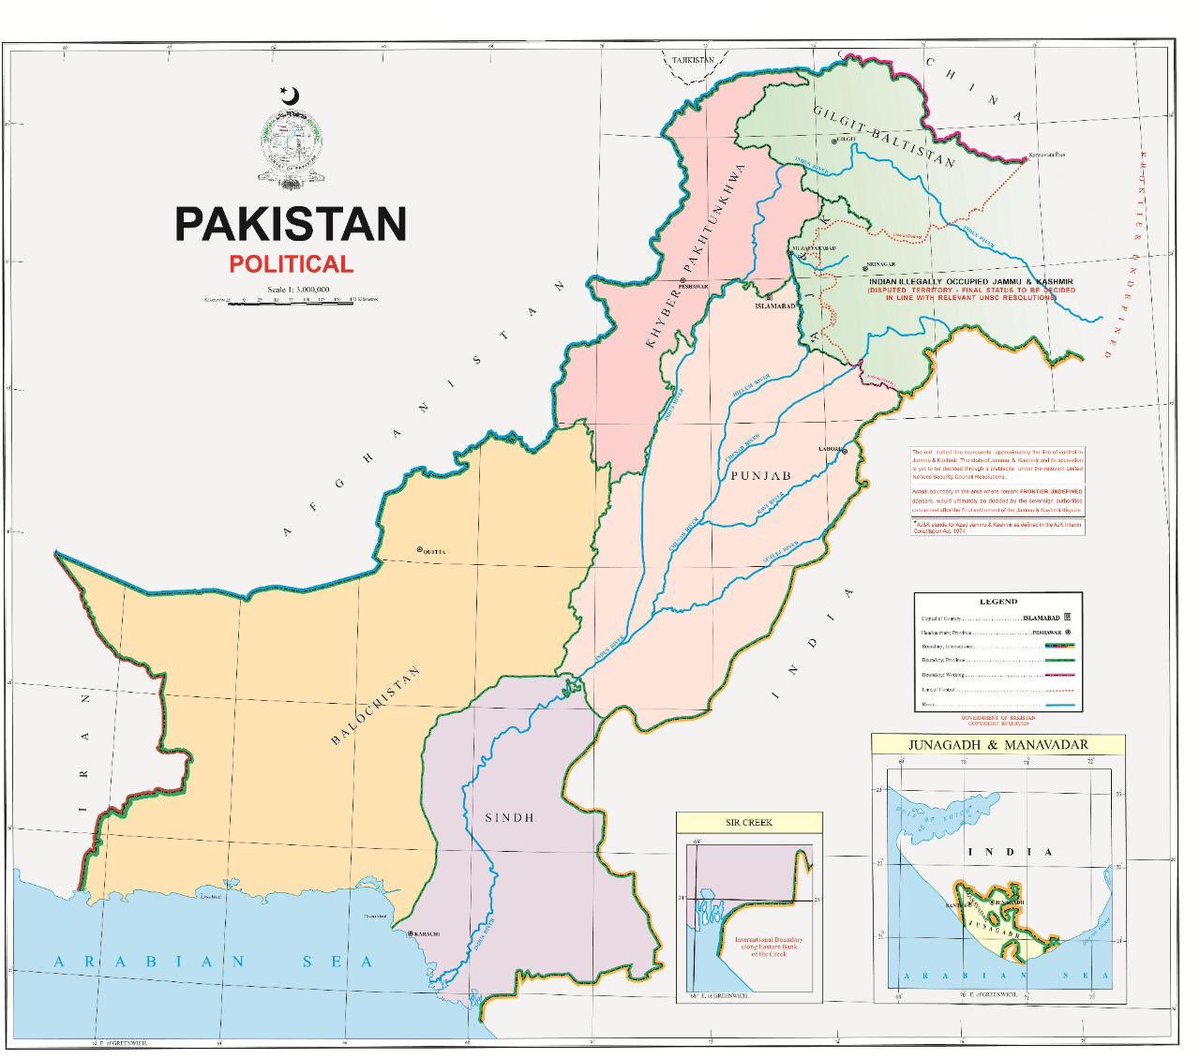 It can be easily established What Pakistan has achieved on Kashmir Policy what Pmln & PPP couldn’t come close to despite being in Power multiple times. 4th Aug Pakistan Fed Cabinet approves new Map showing IOK a part of Pakistan which is symbolic yet reiterating liberation of IOK